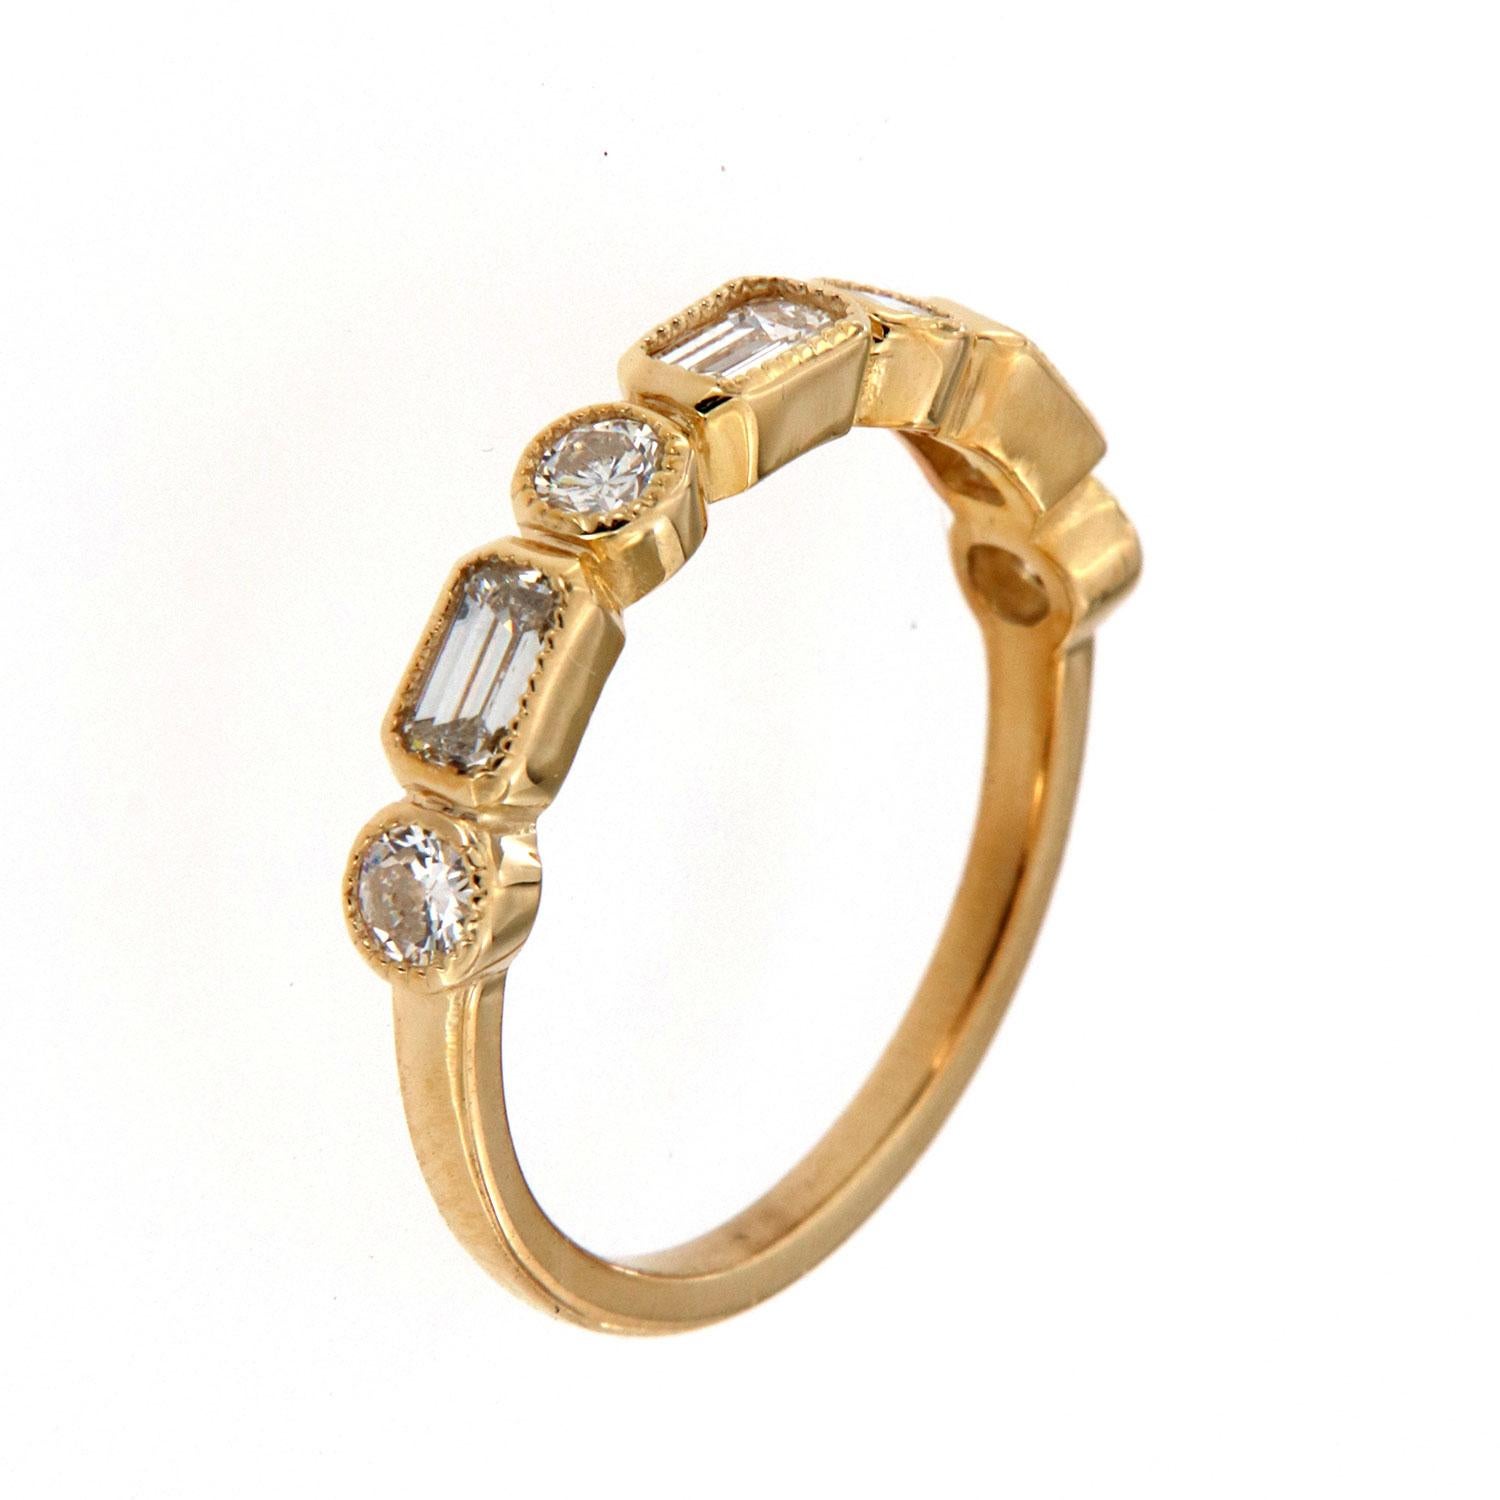 This yellow gold band features three(3) Emerald-shaped diamonds in a total weight of 0.56 carat alternating with four (4) brilliant round diamonds in a total weight of 0.31 carat. A thin Milgain designed bezel surrounds each diamond on top of a 1.6